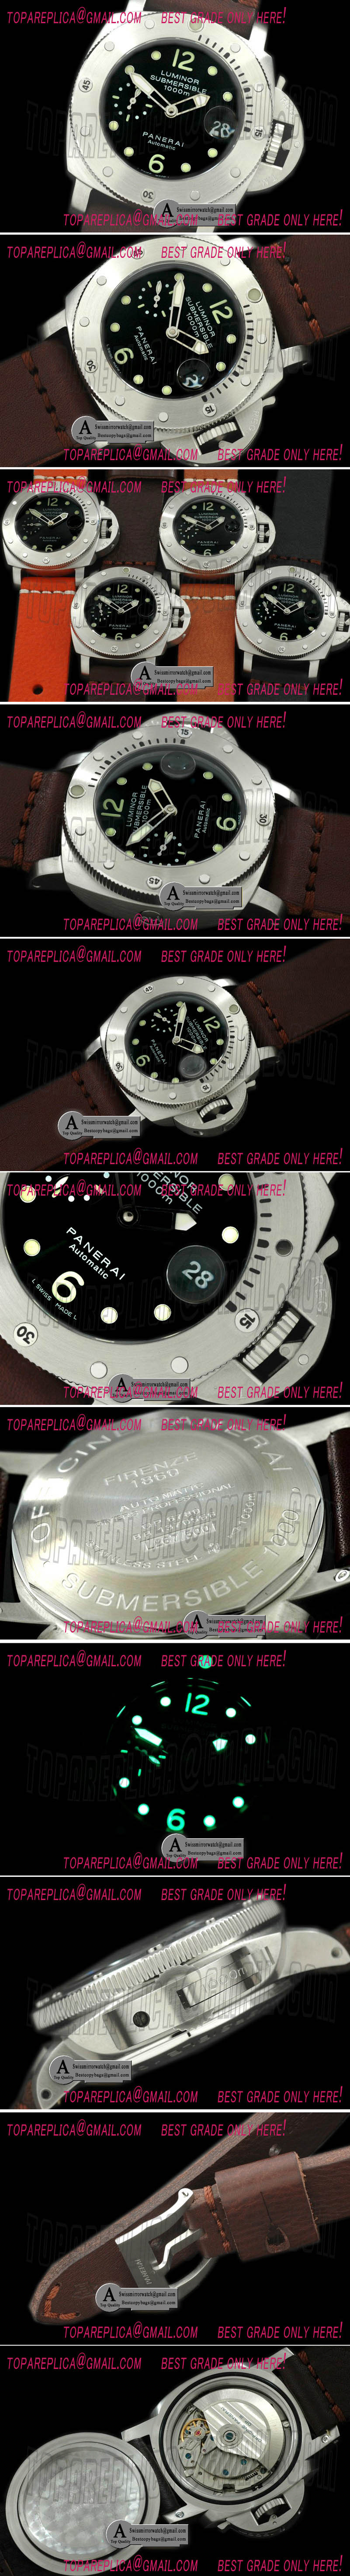 Panerai Pam 243 Submersible SS/Leather Replica Watches